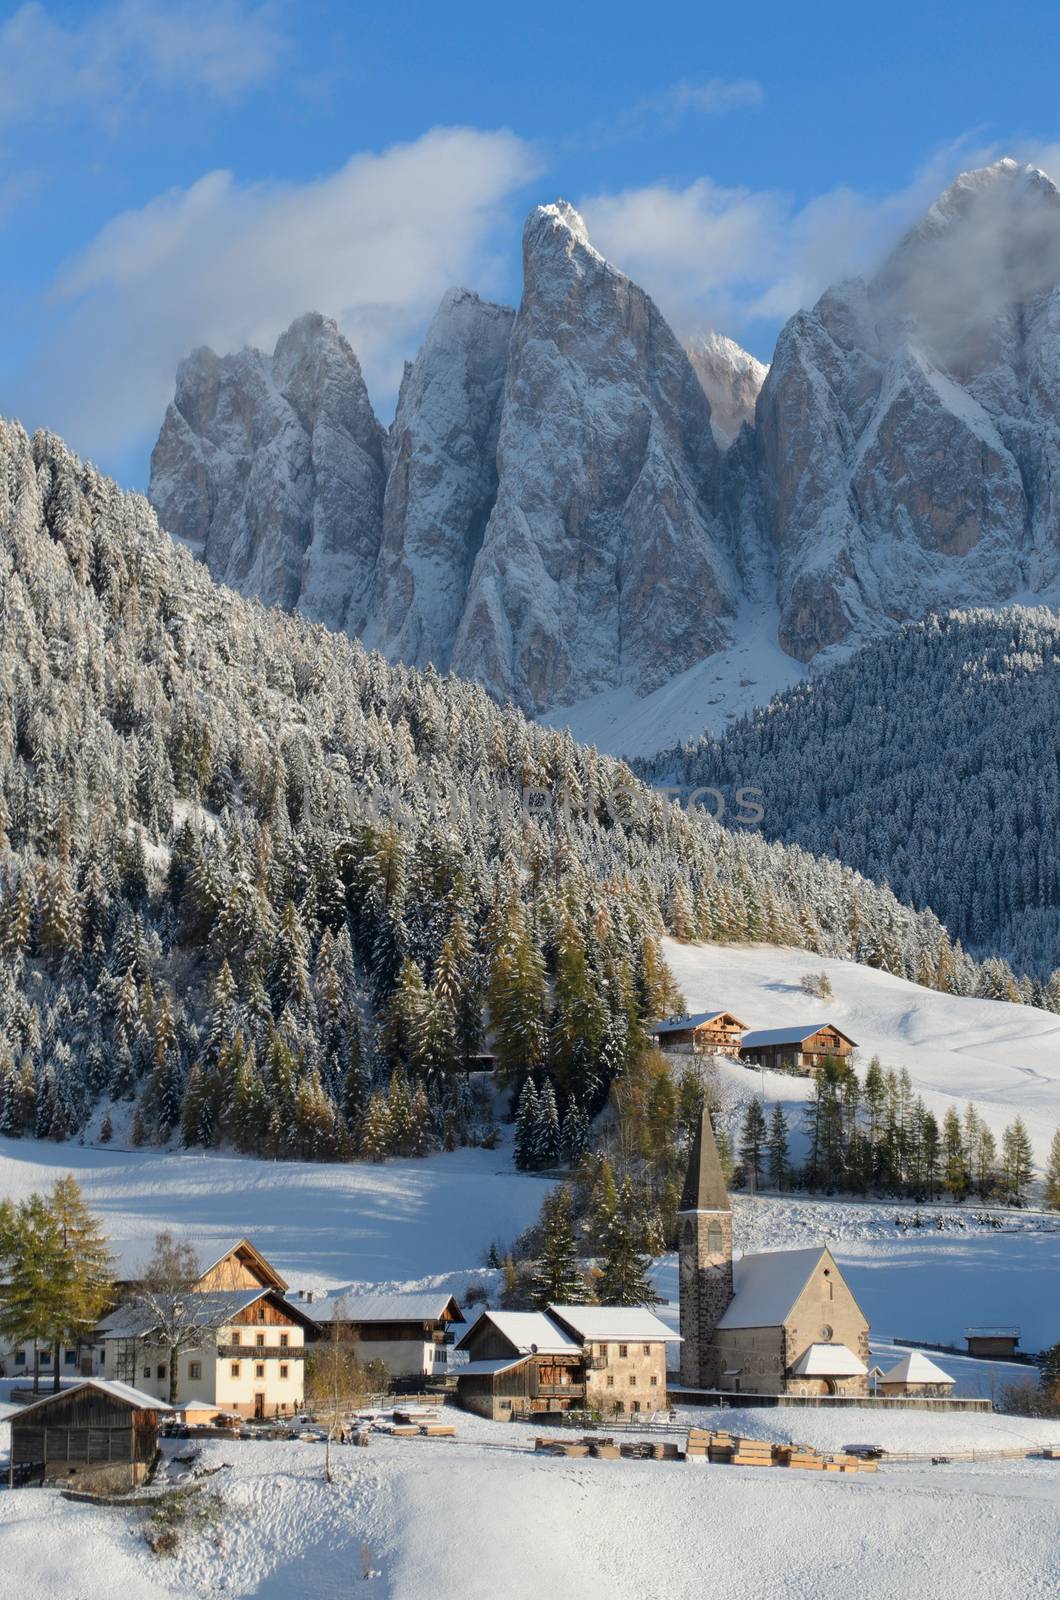 The church of St. Magdalena or Santa Maddalena, a village in front of the Geisler or Odle dolomites mountain peaks in the Val di Funes (Villnösser Tal) in South Tyrol in Italy in winter.